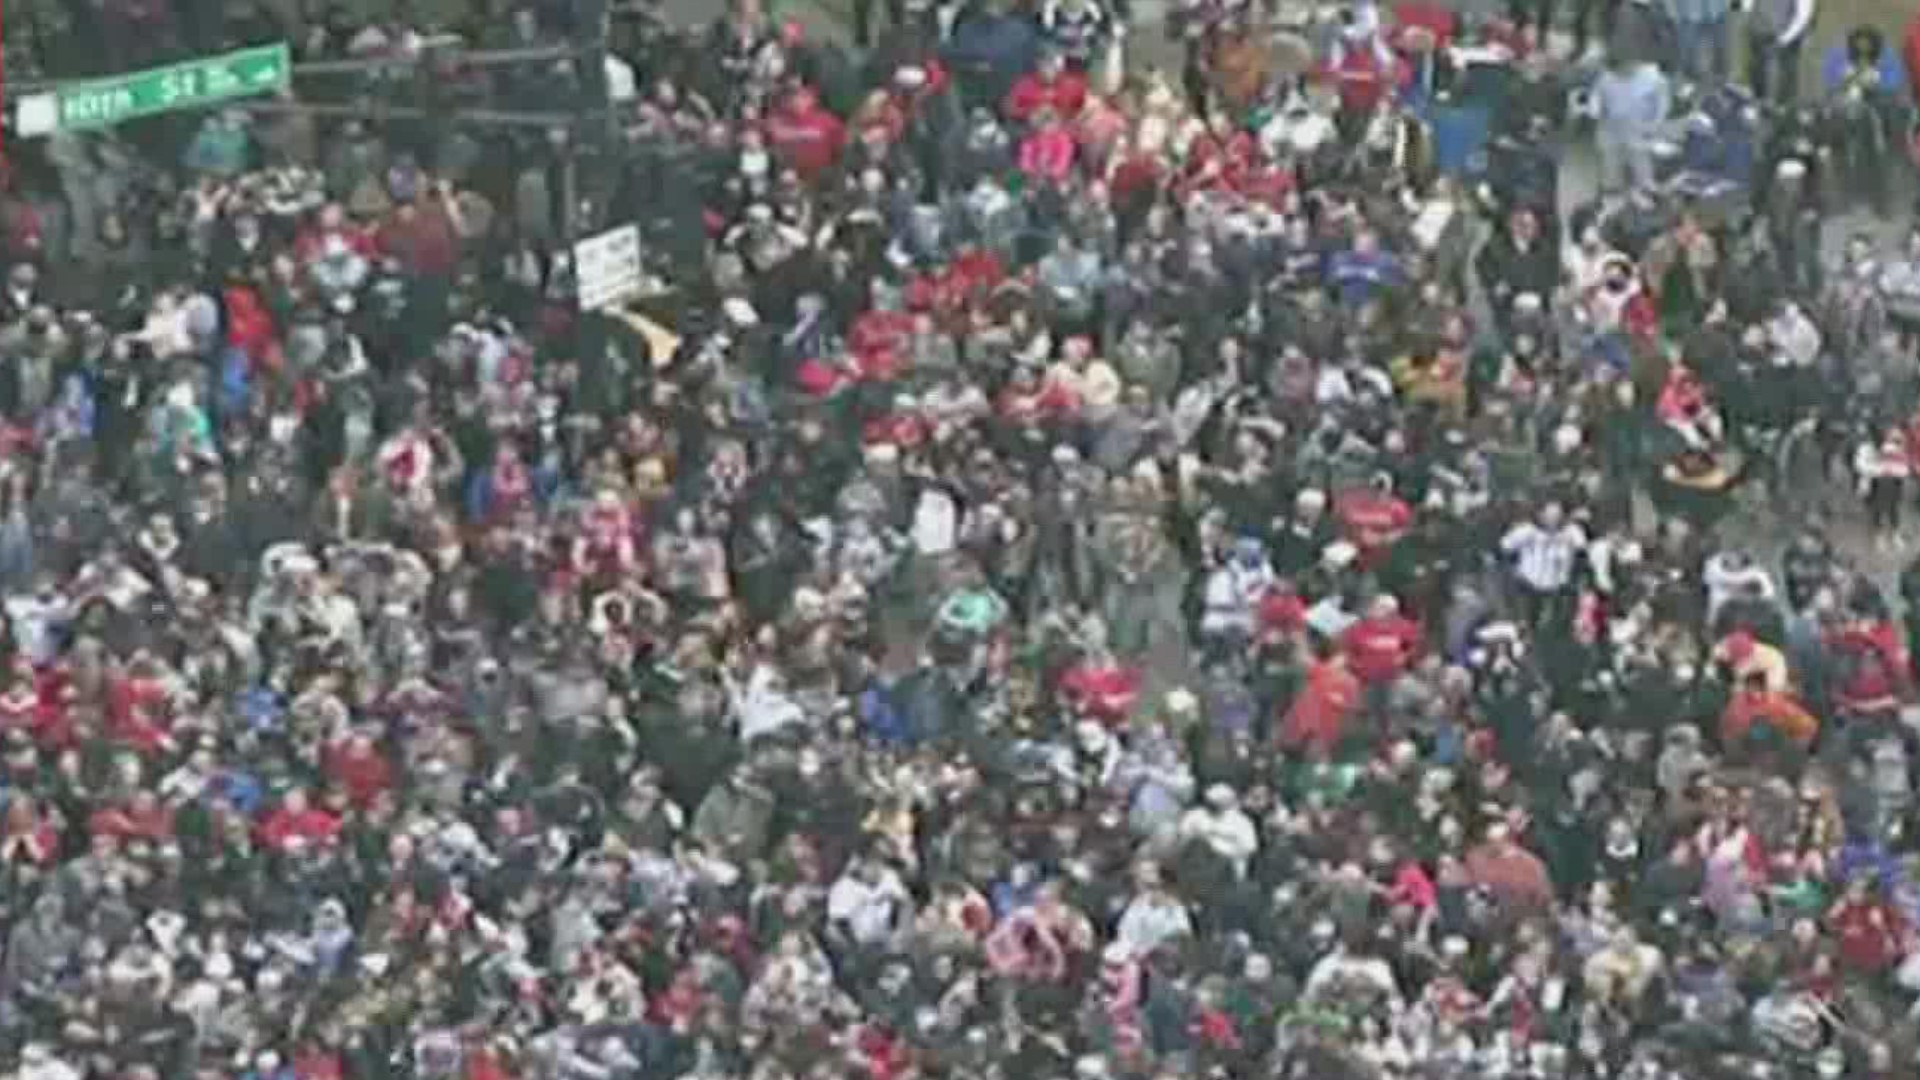 The parade is moving through downtown Atlanta and Midtown. It will then head to Cobb County.